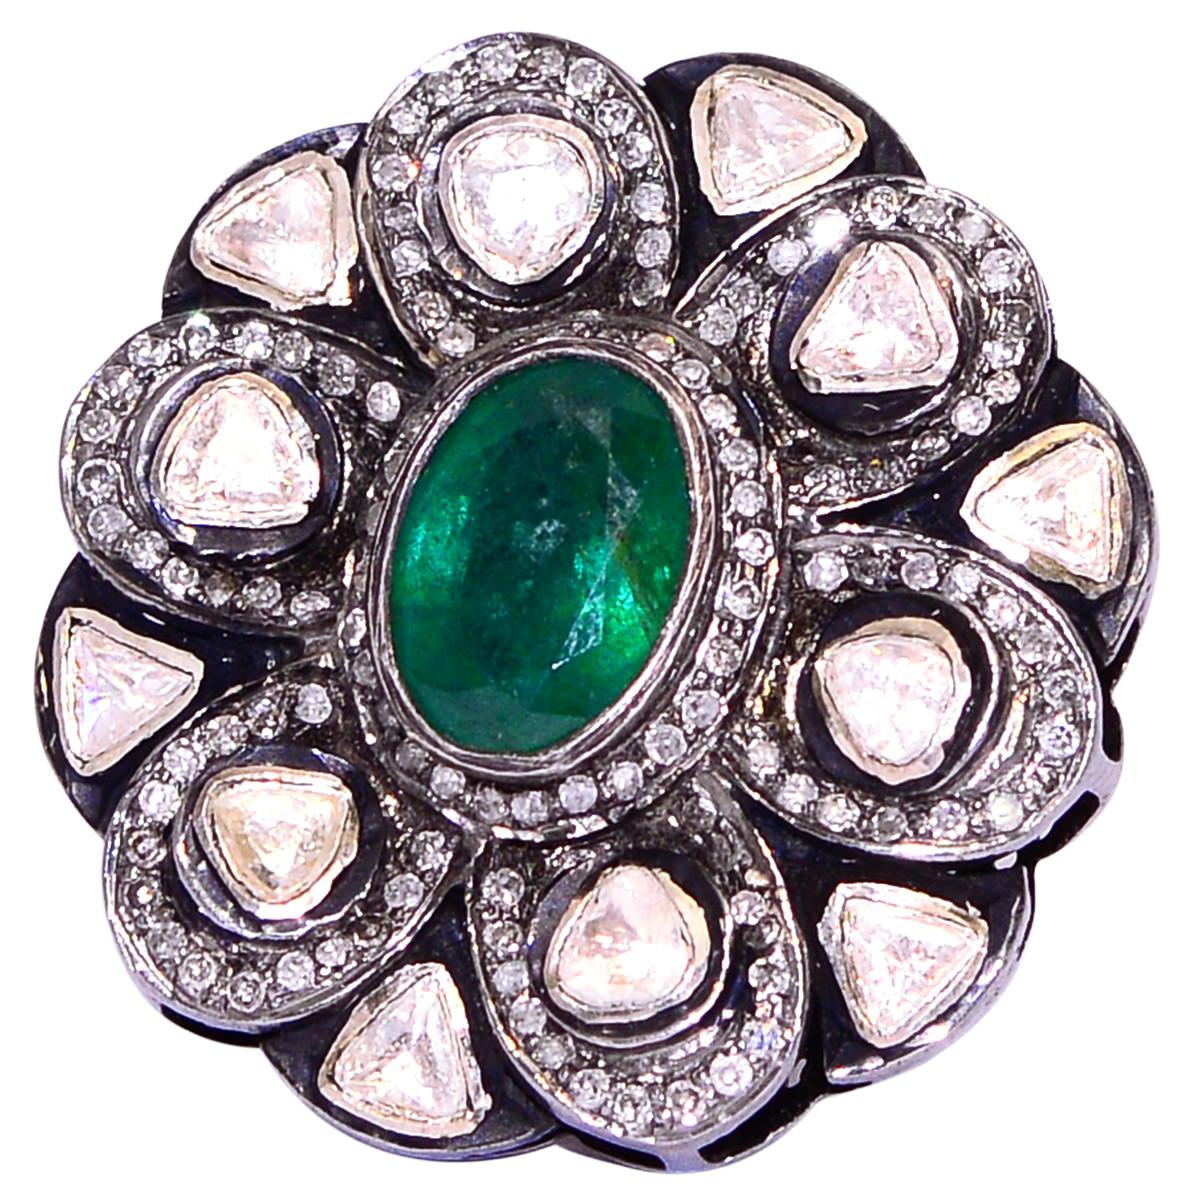 Flower Ring with Diamonds and Emerald in Center in Silver